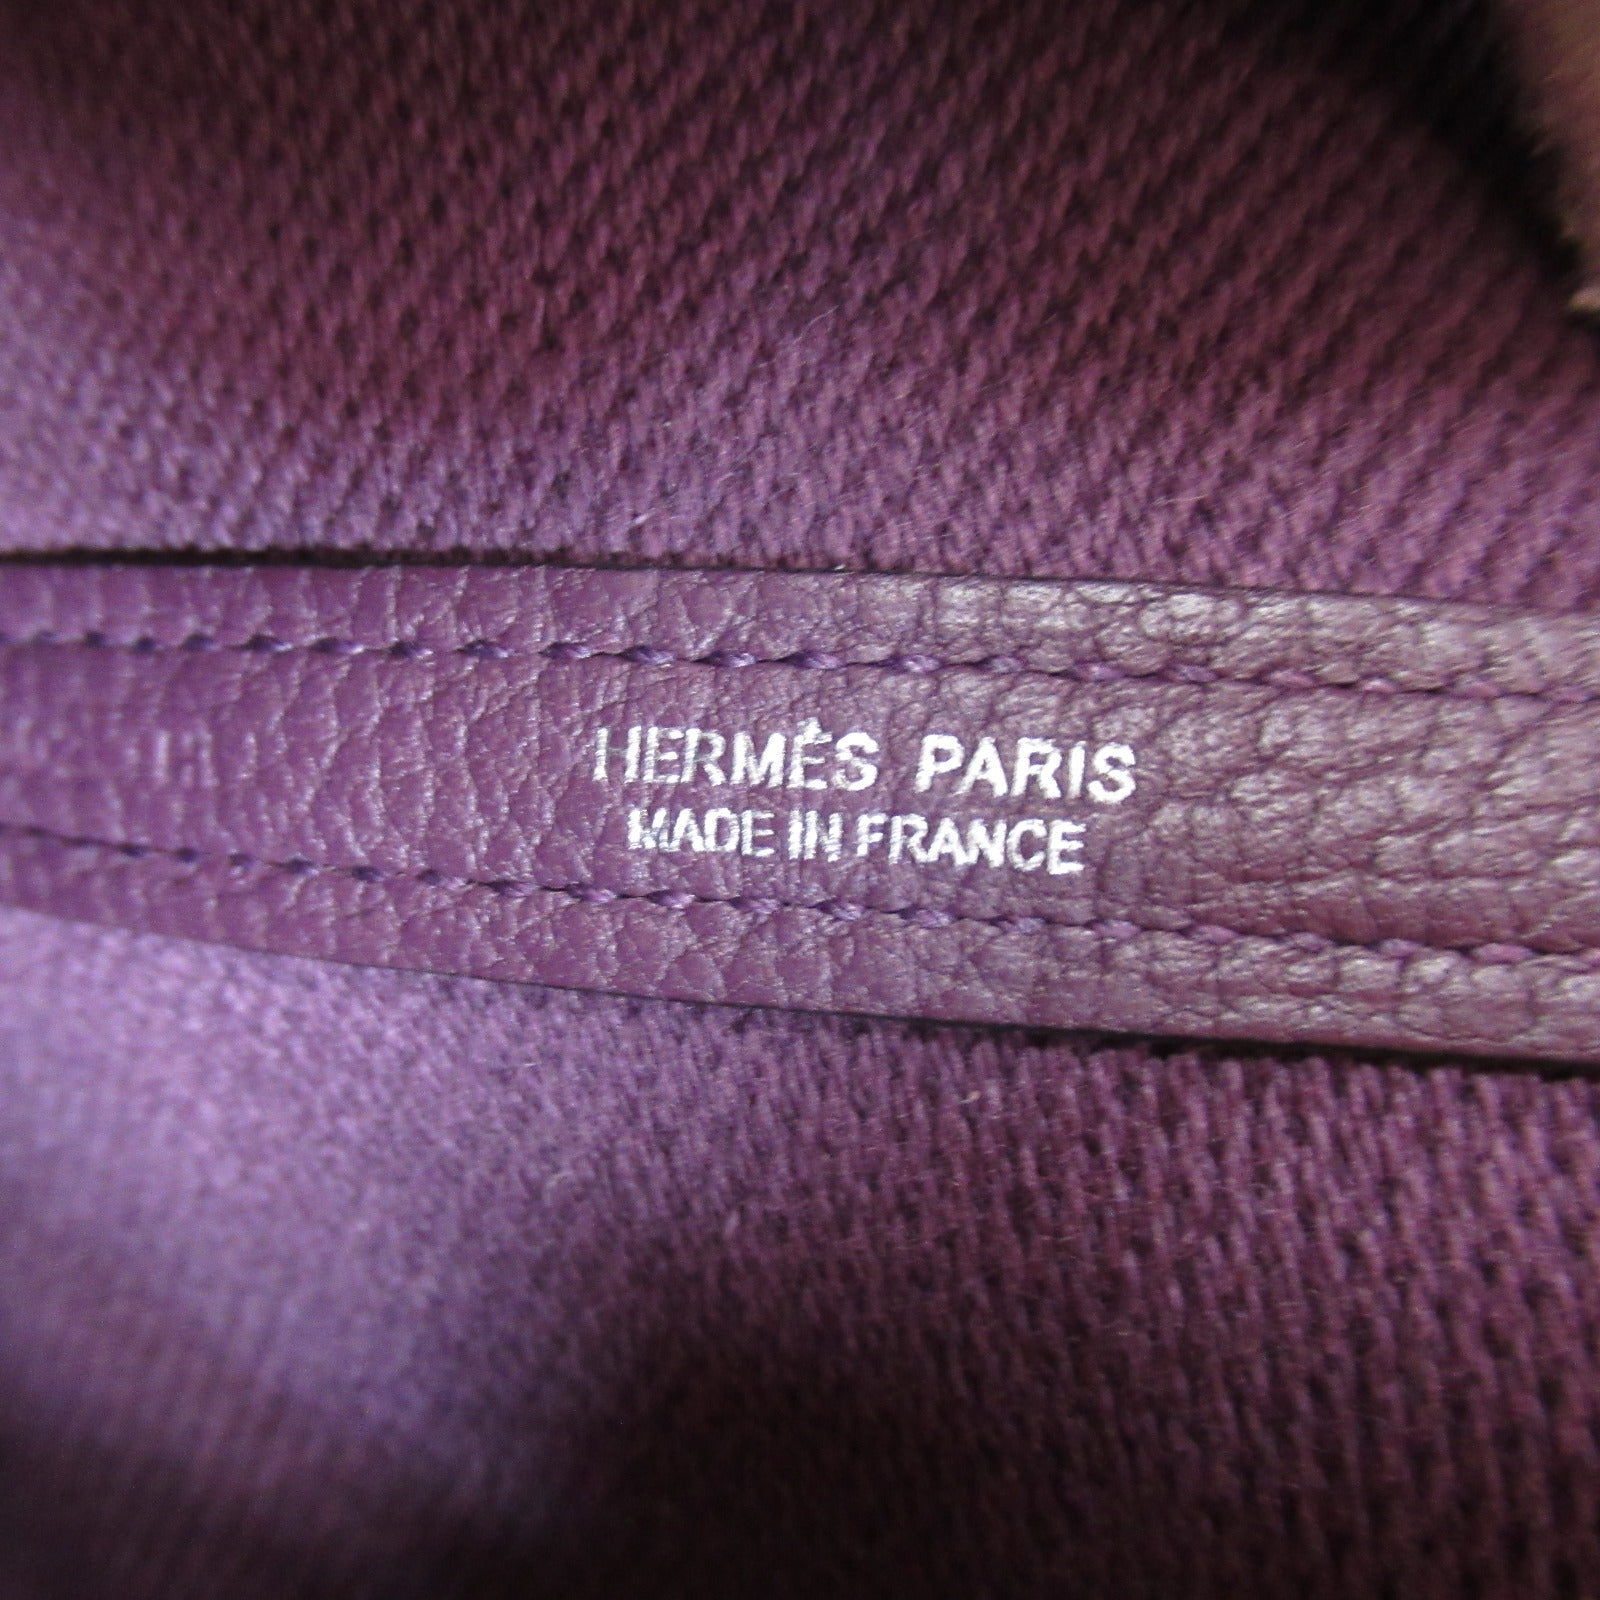 Hermes Hermes Garden Party PM Cassis Tote Bag  Bag Leather Fabric Negonda Towerash  Pearl Casey